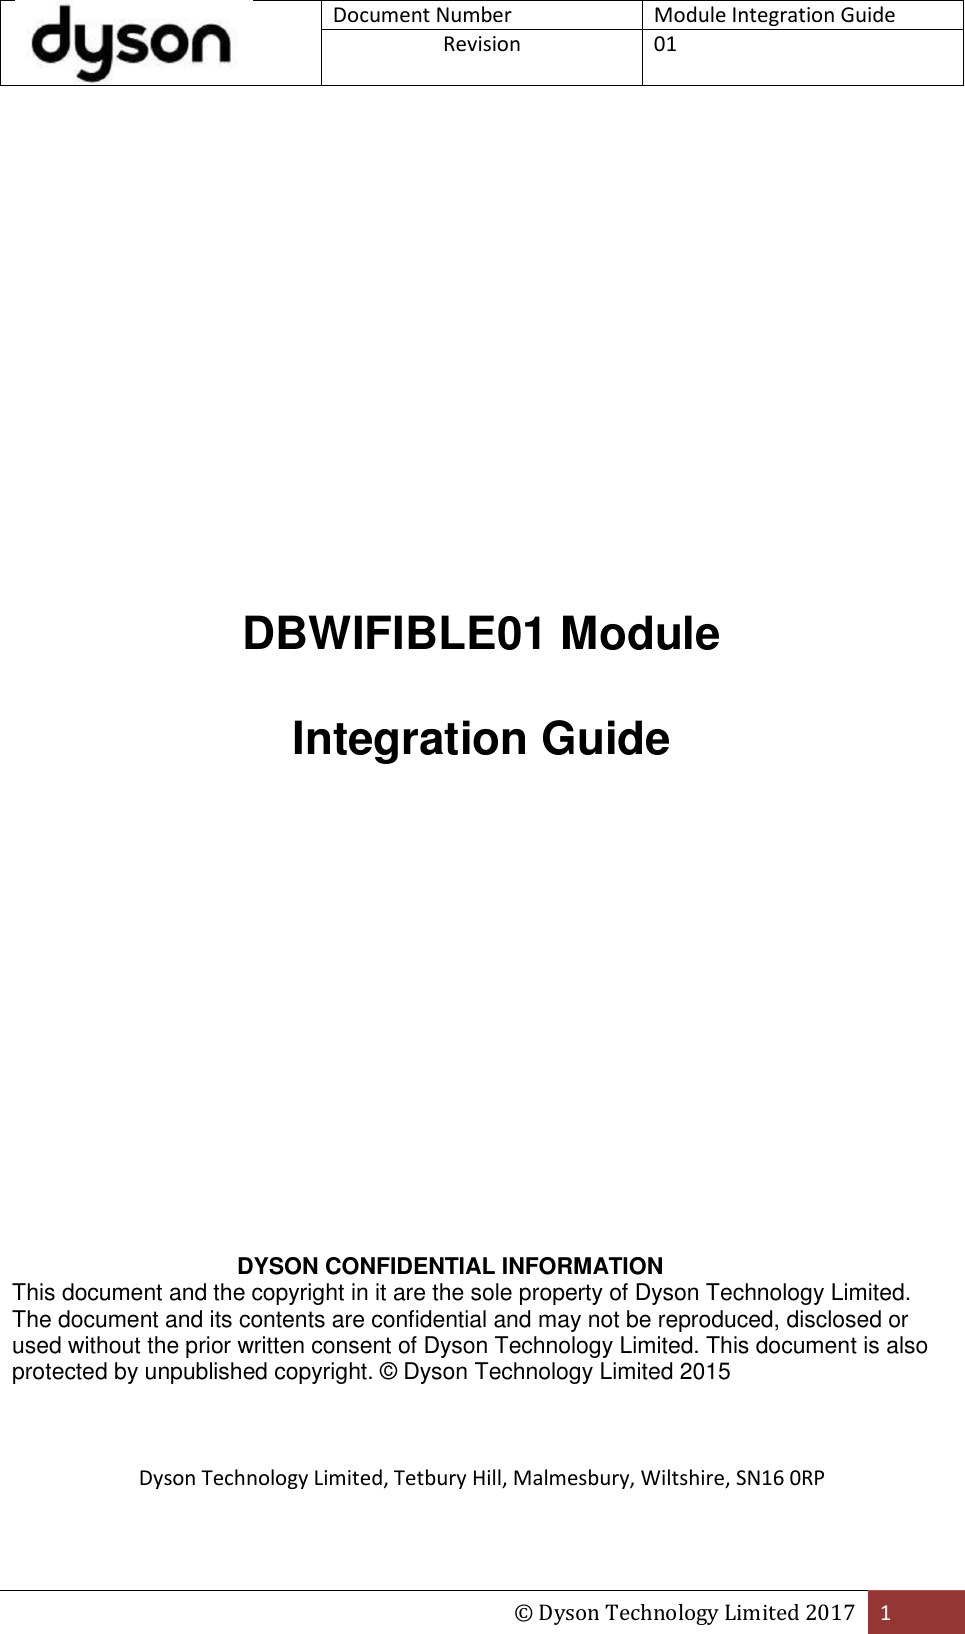  Document Number Module Integration Guide Revision  01  © Dyson Technology Limited 2017 1                DBWIFIBLE01 Module  Integration Guide                           DYSON CONFIDENTIAL INFORMATION  This document and the copyright in it are the sole property of Dyson Technology Limited. The document and its contents are confidential and may not be reproduced, disclosed or used without the prior written consent of Dyson Technology Limited. This document is also protected by unpublished copyright. © Dyson Technology Limited 2015     Dyson Technology Limited, Tetbury Hill, Malmesbury, Wiltshire, SN16 0RP  